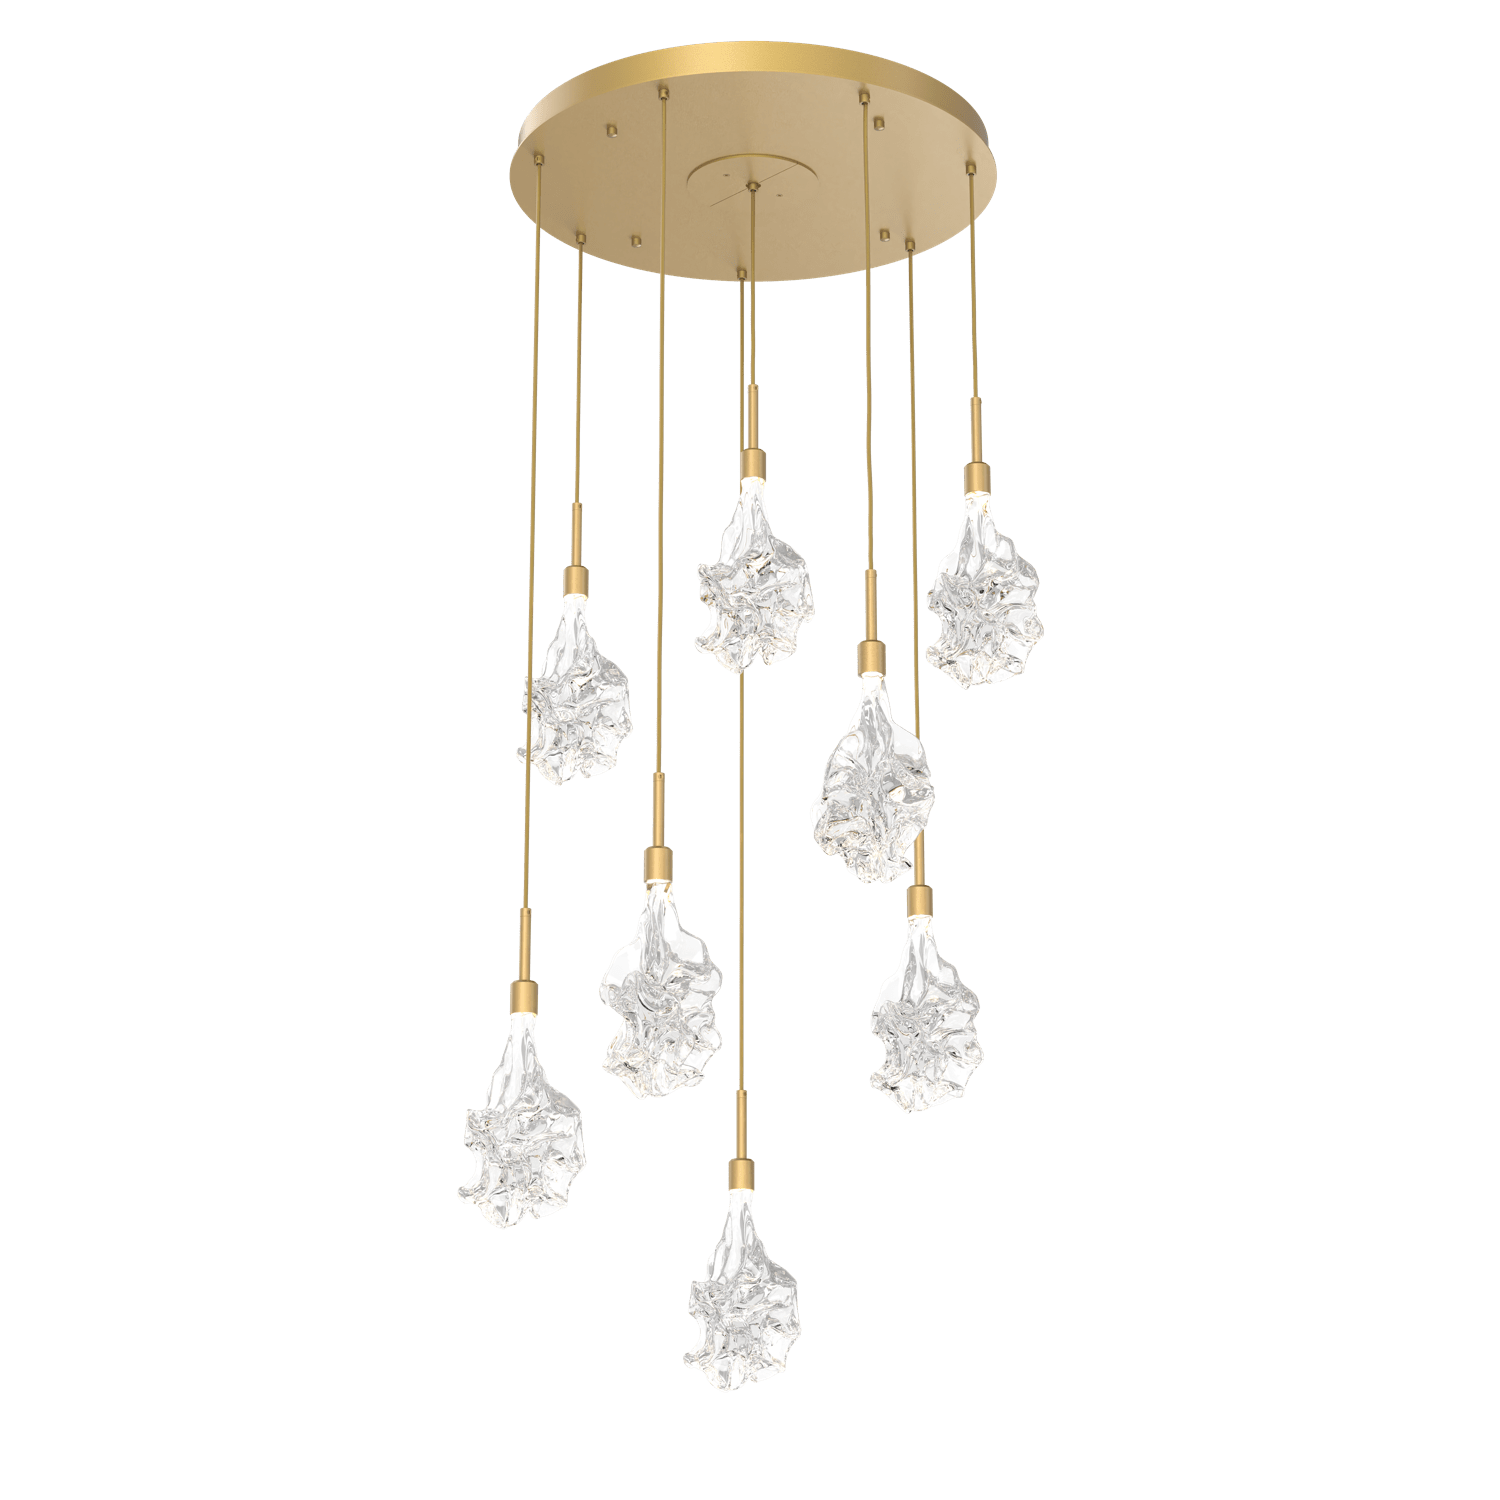 CHB0059-08-GB-Hammerton-Studio-Blossom-8-light-round-pendant-chandelier-with-gilded-brass-finish-and-clear-handblown-crystal-glass-shades-and-LED-lamping